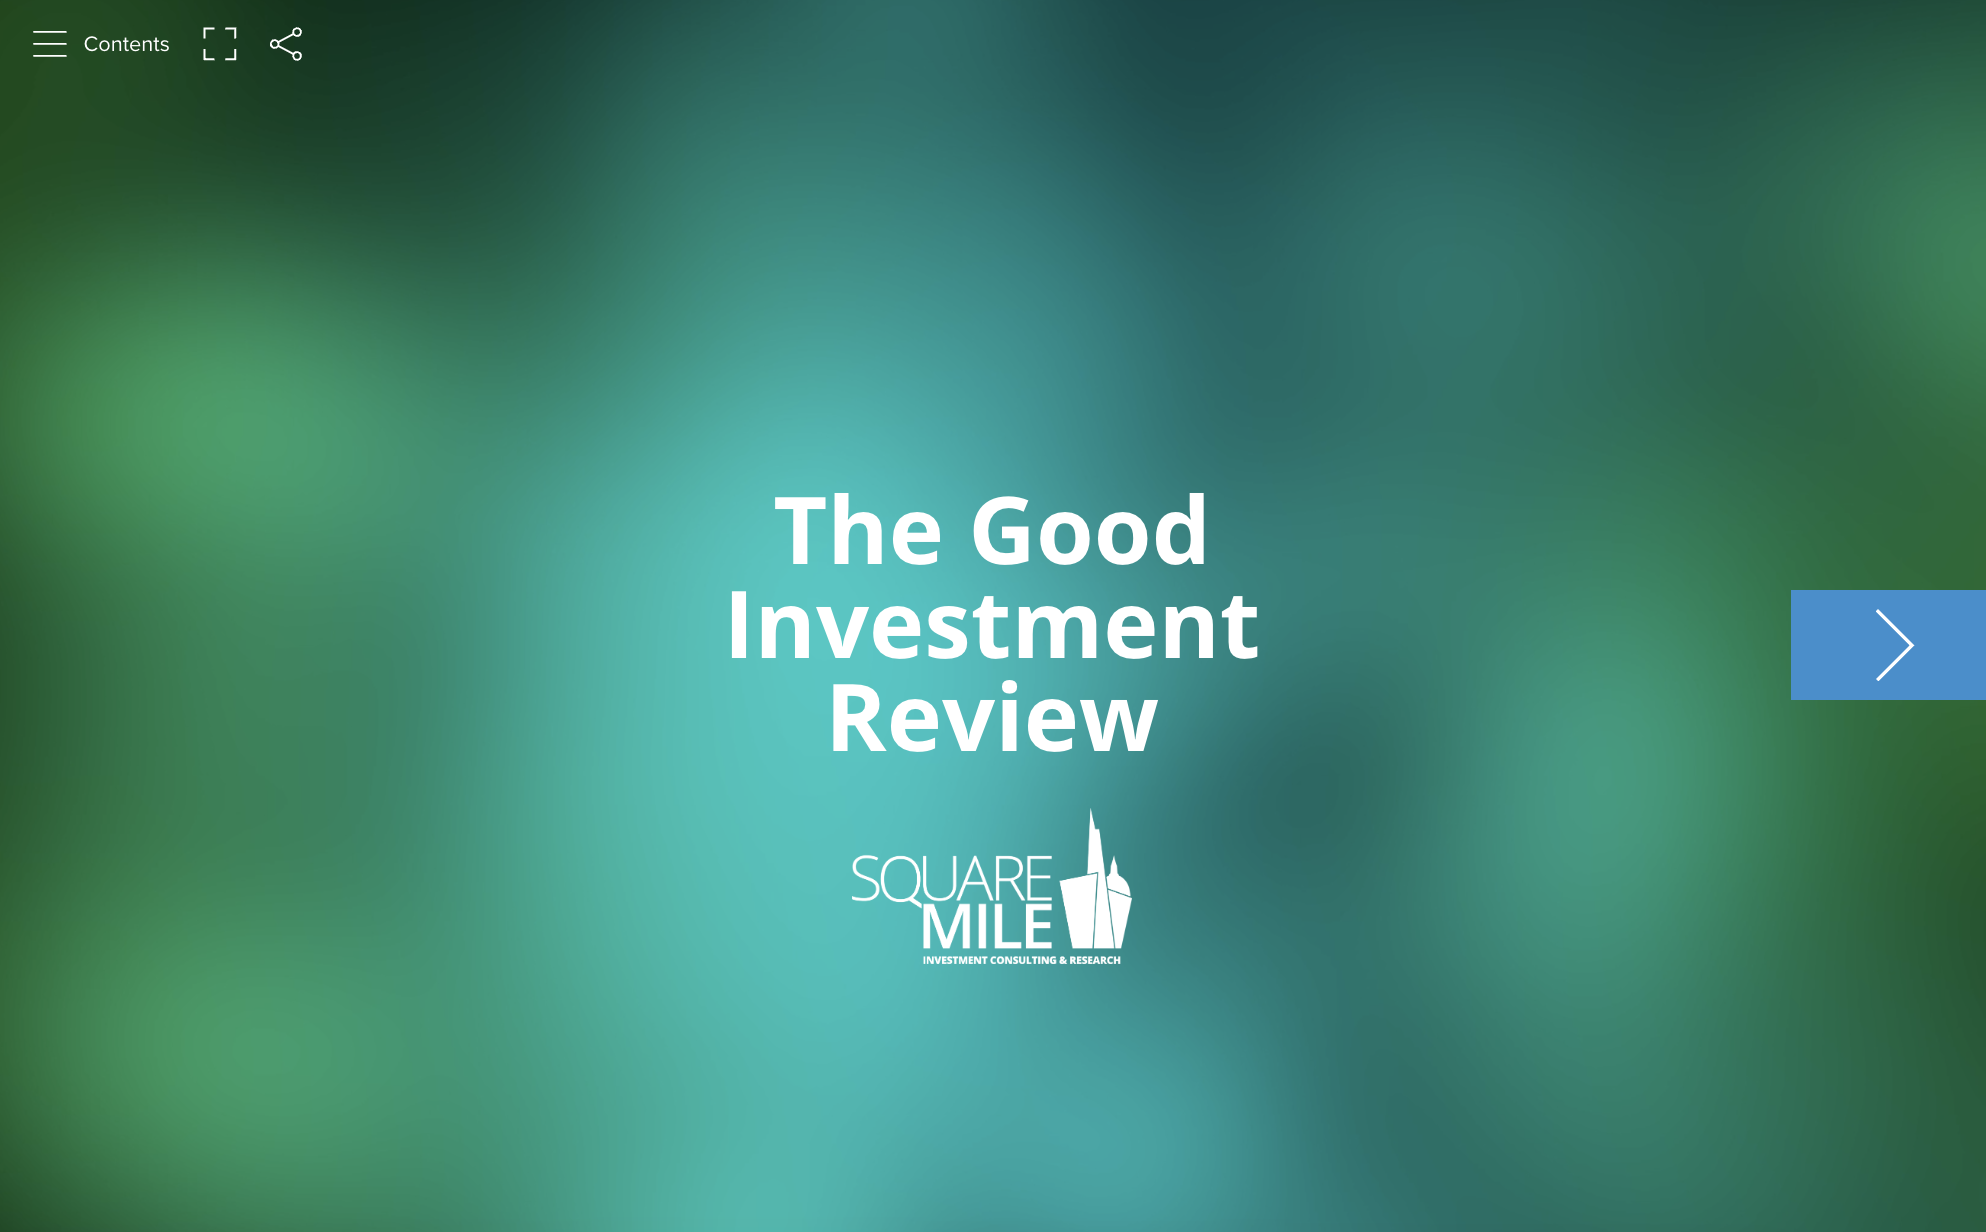 The Good Investment Review